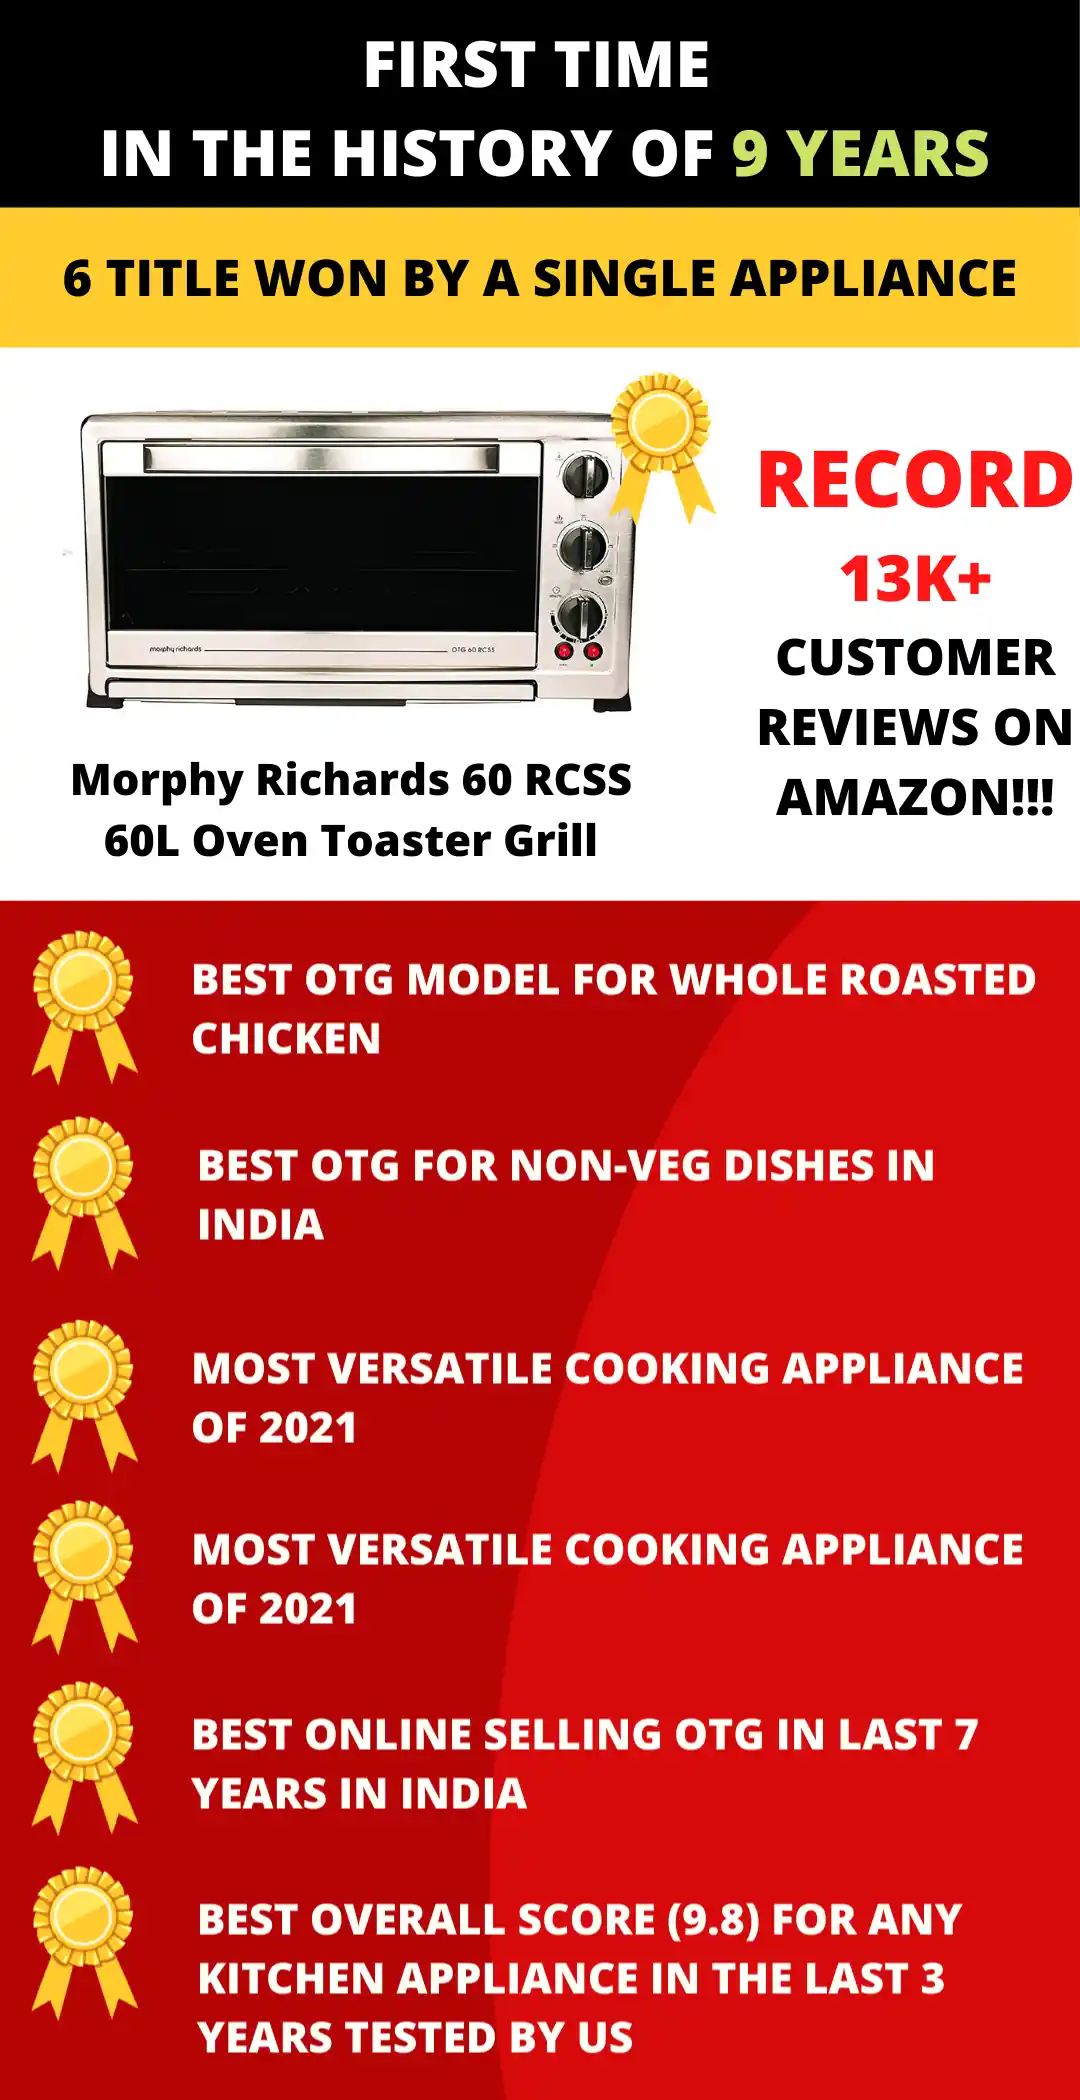 Morphy Richards 60 RCSS 60L Oven Toaster Grill (Black/Silver)